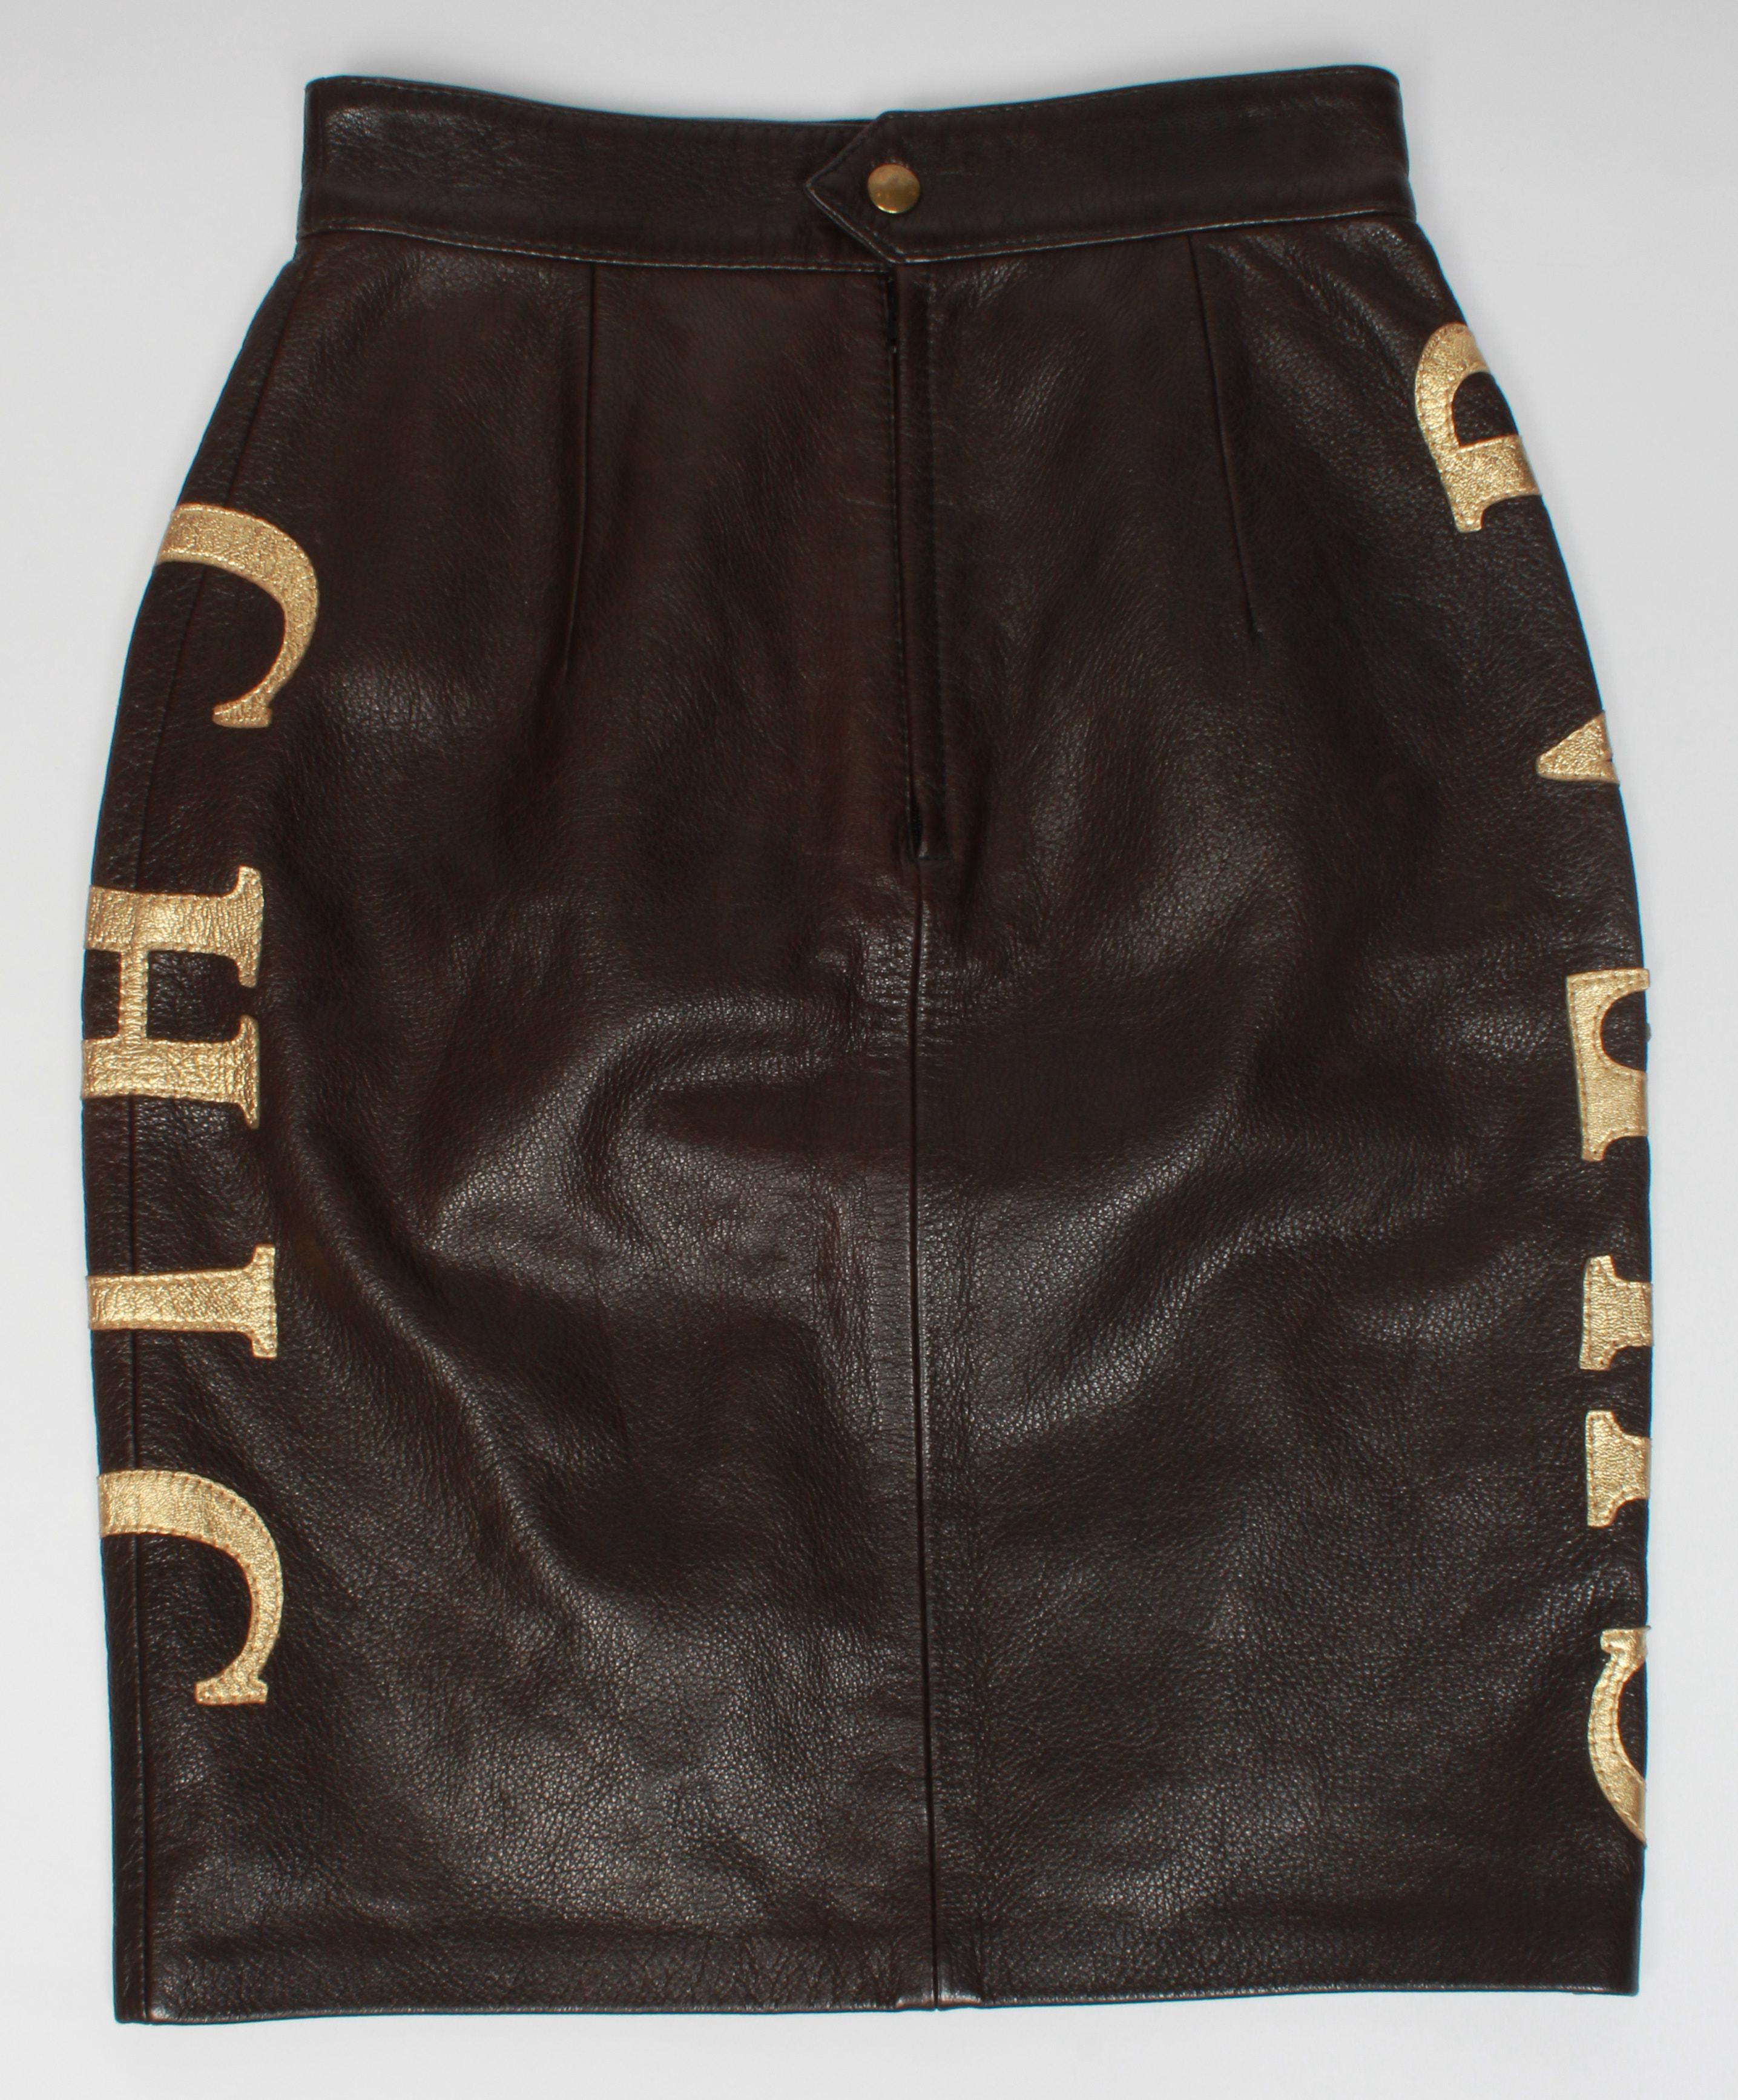 Black Moschino Cheap & Chic Chocolate and Gold Leather Pencil Skirt For Sale